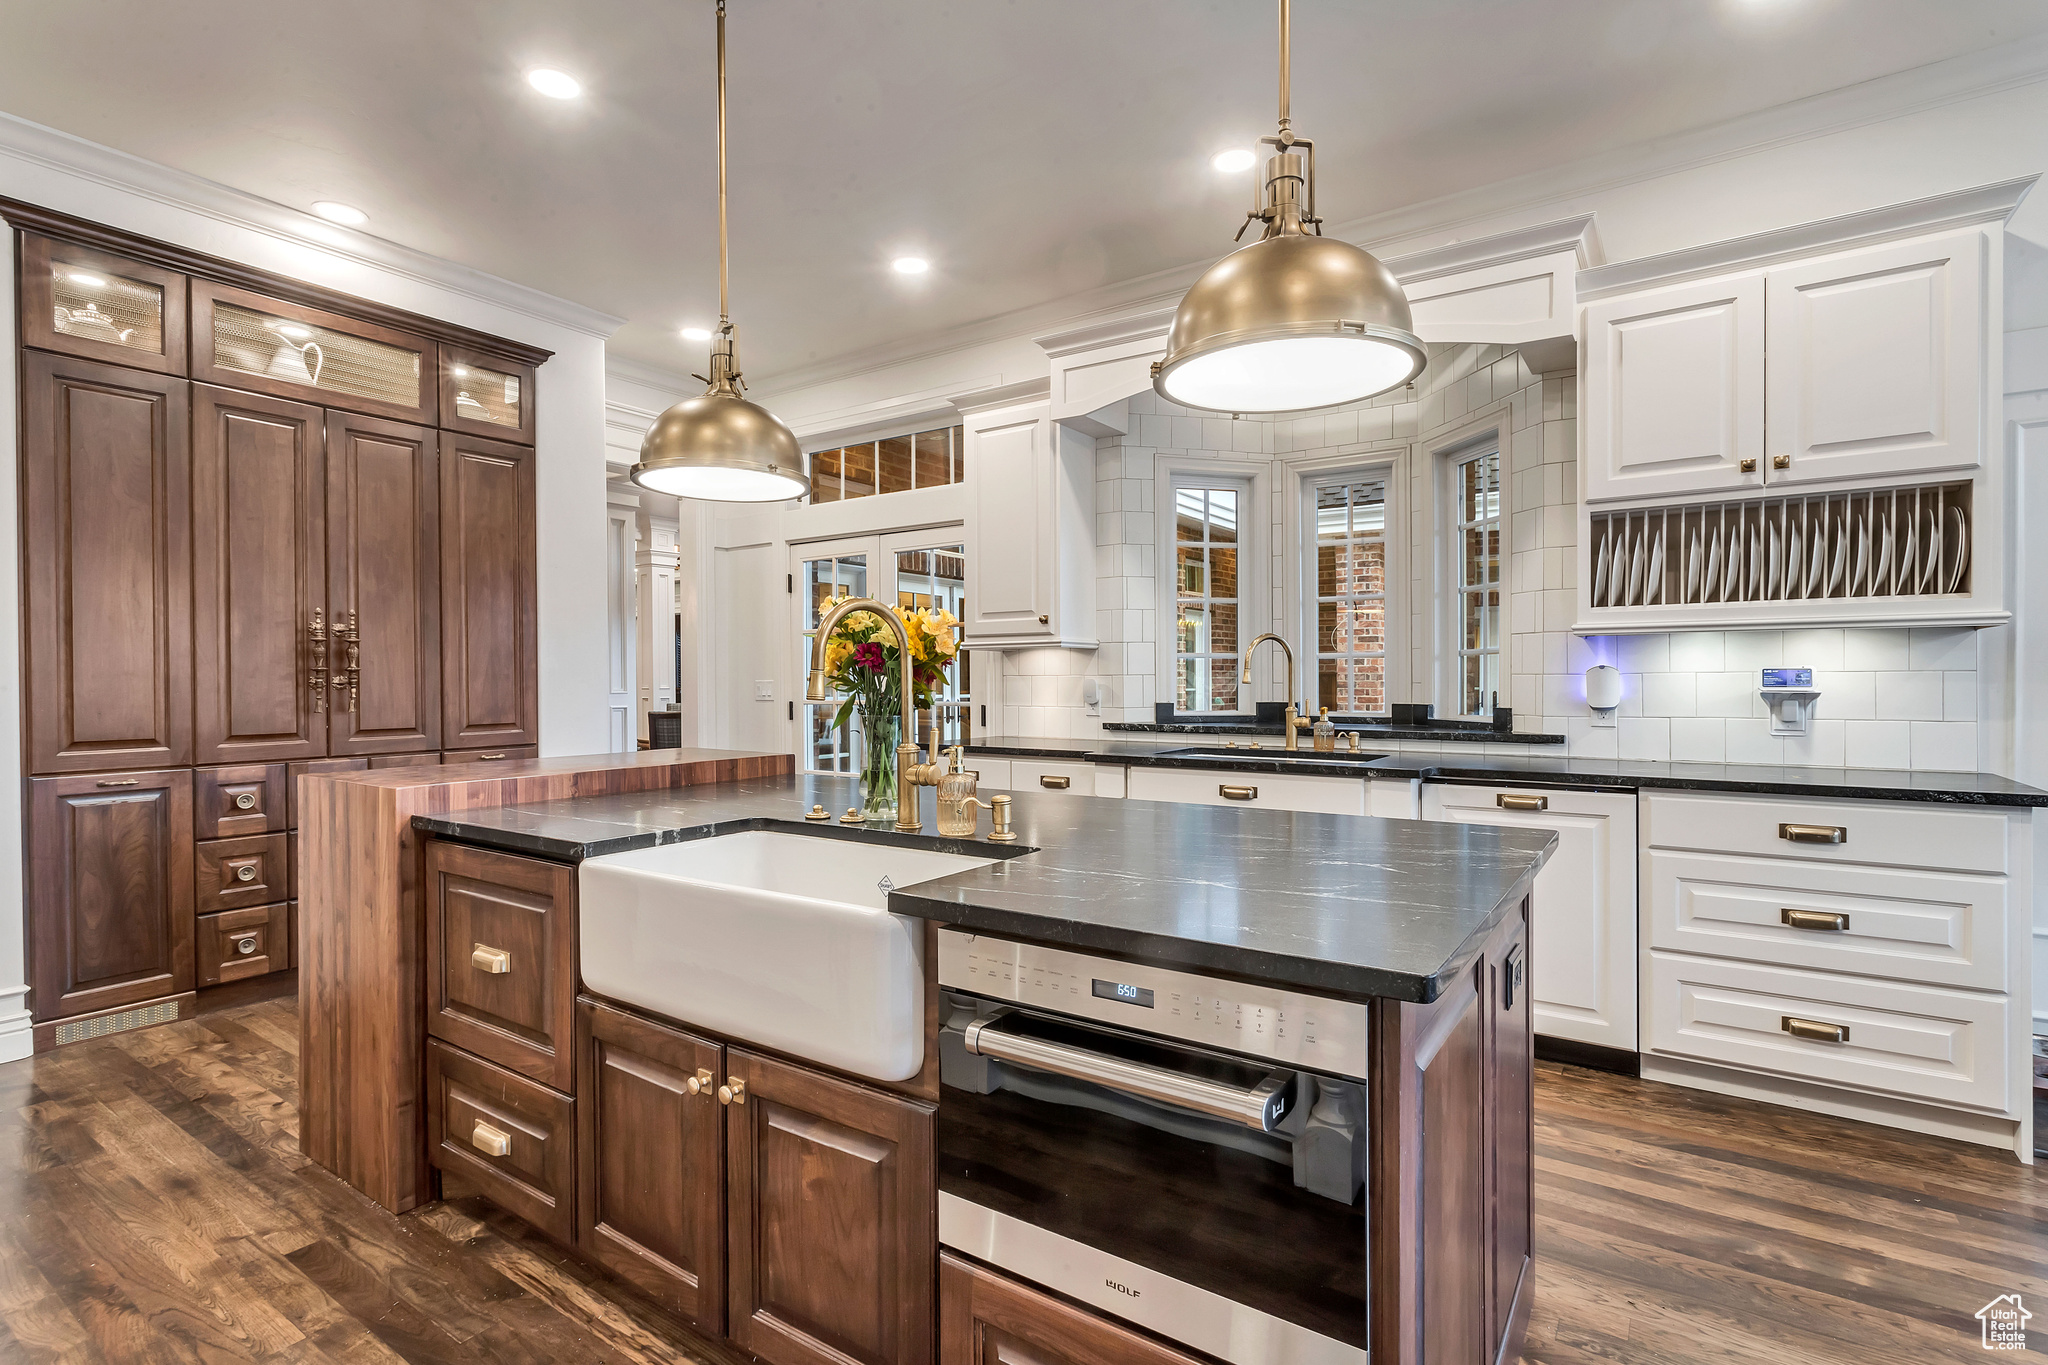 Kitchen featuring a kitchen island, dark wood flooring, oven, and hanging light fixtures